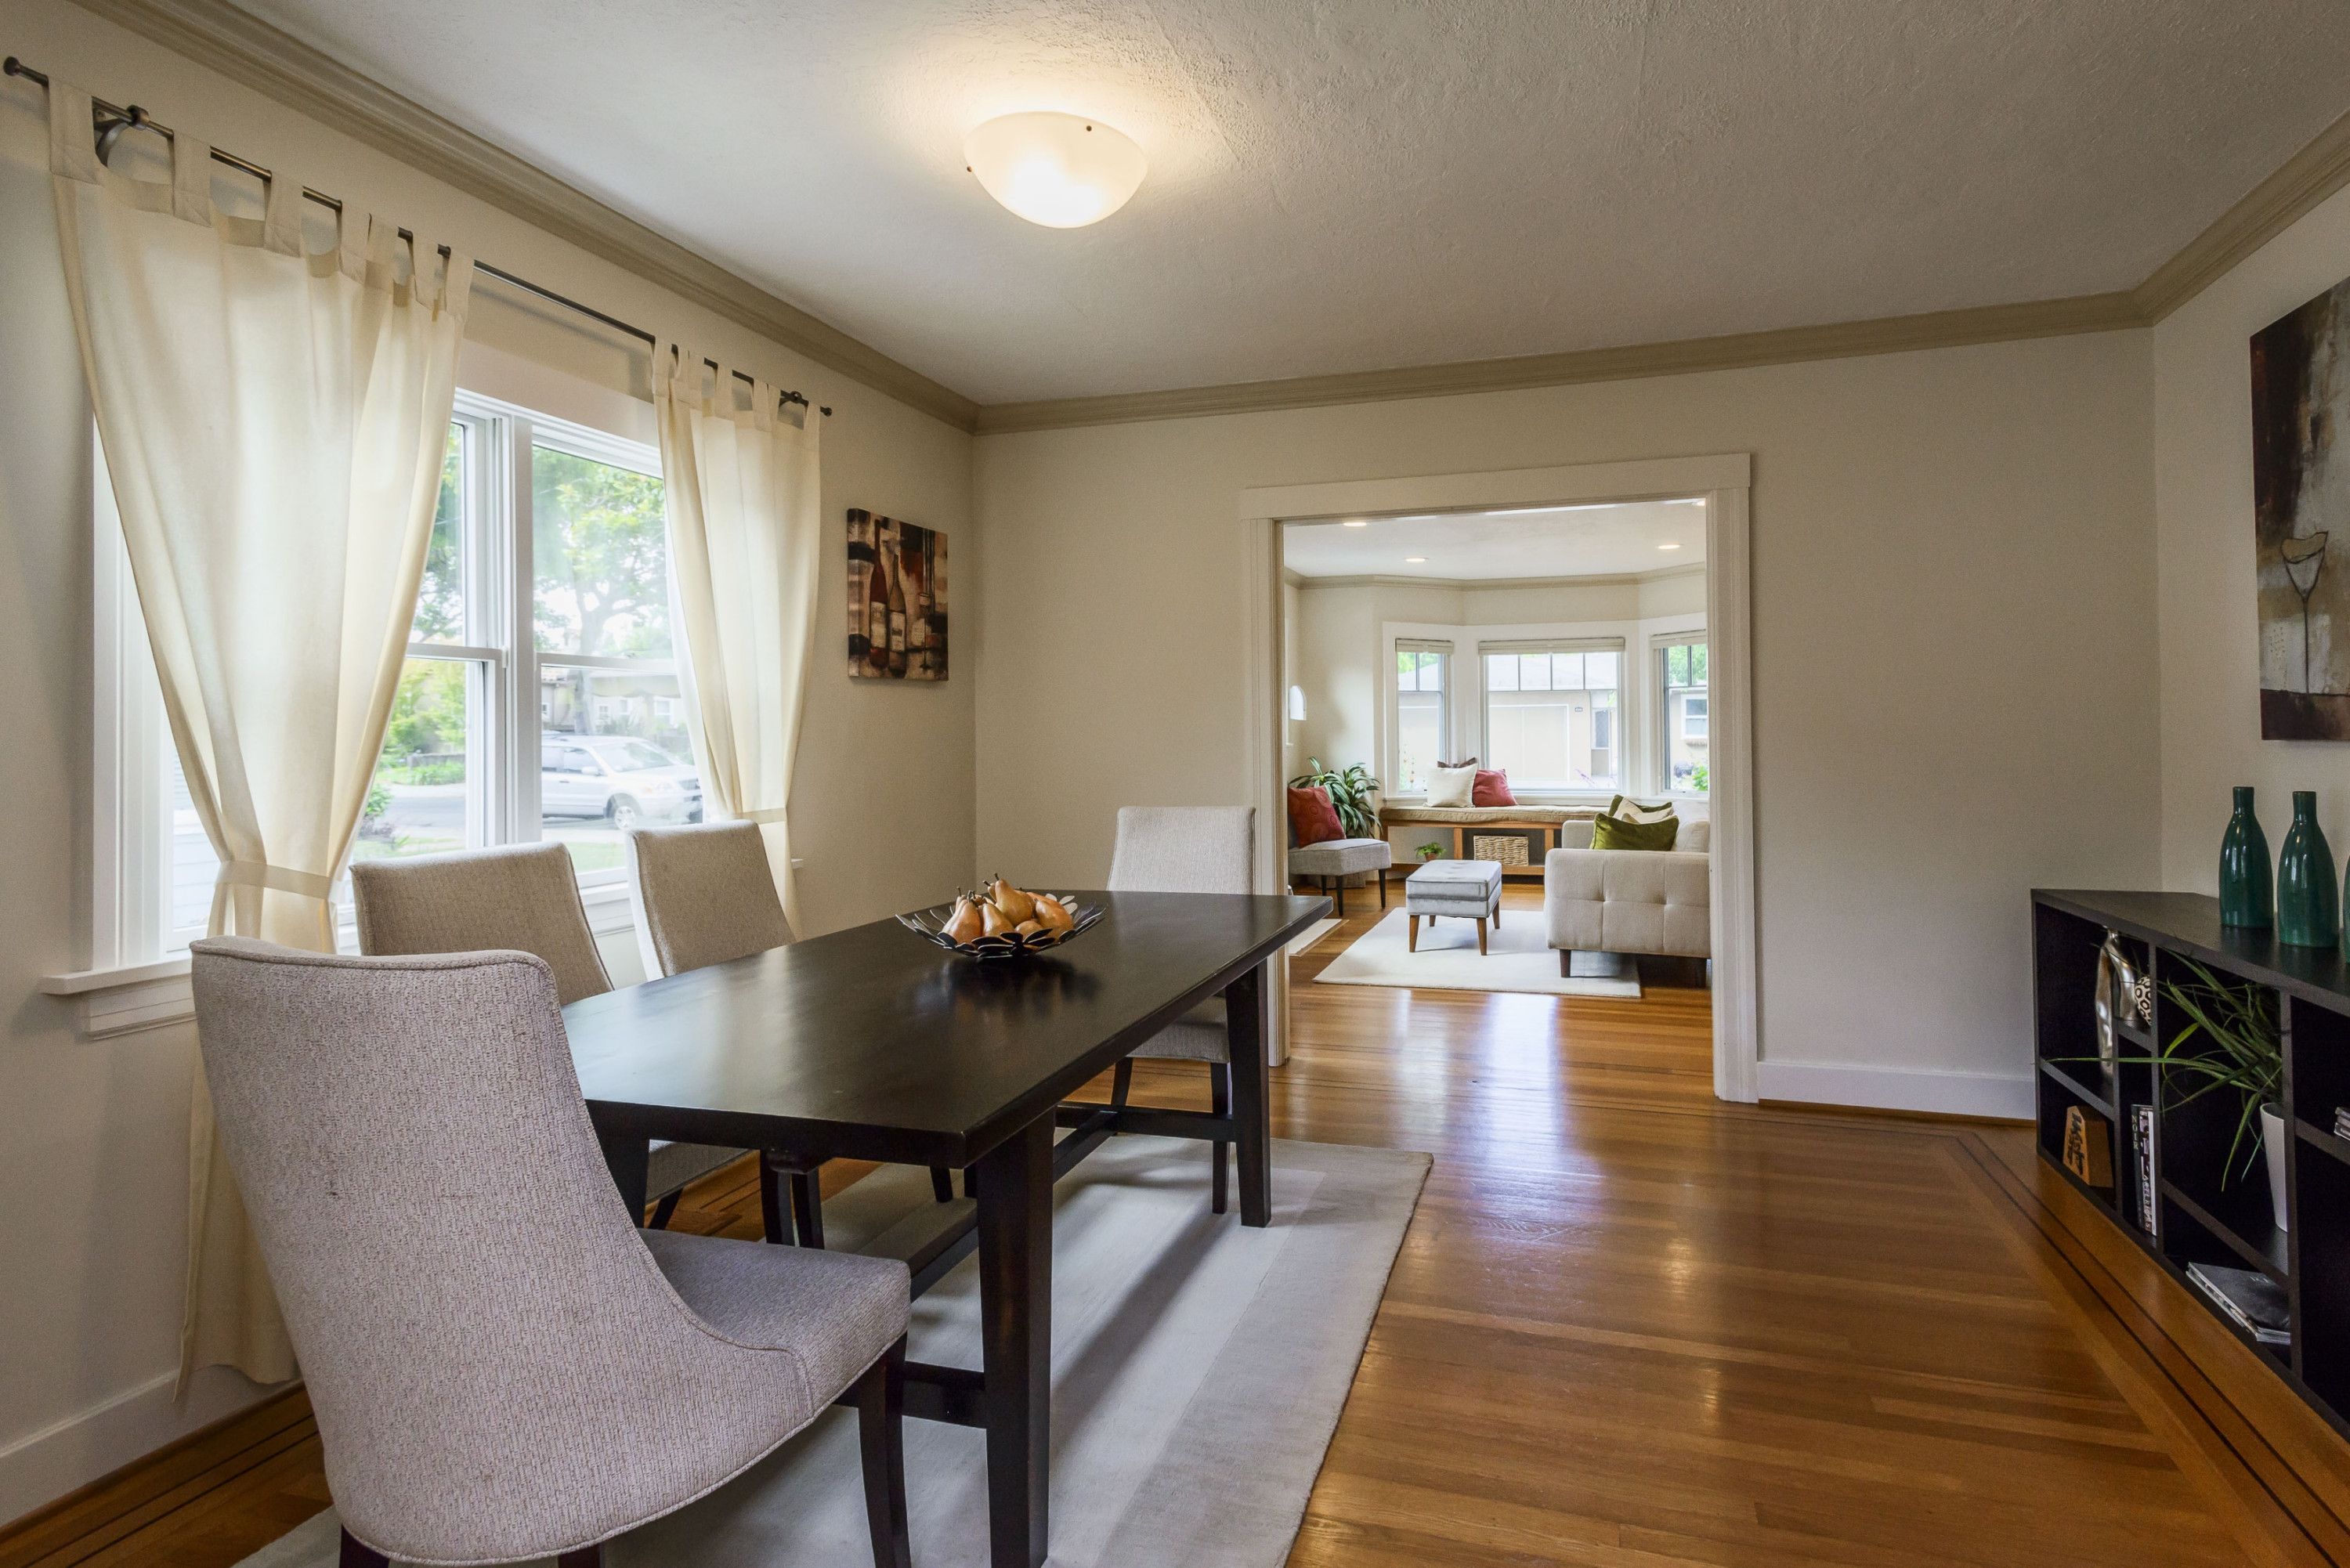 224 Channing Road Dining Area Dome Light in Lyon Hoag Neighborhood in Burlingame..